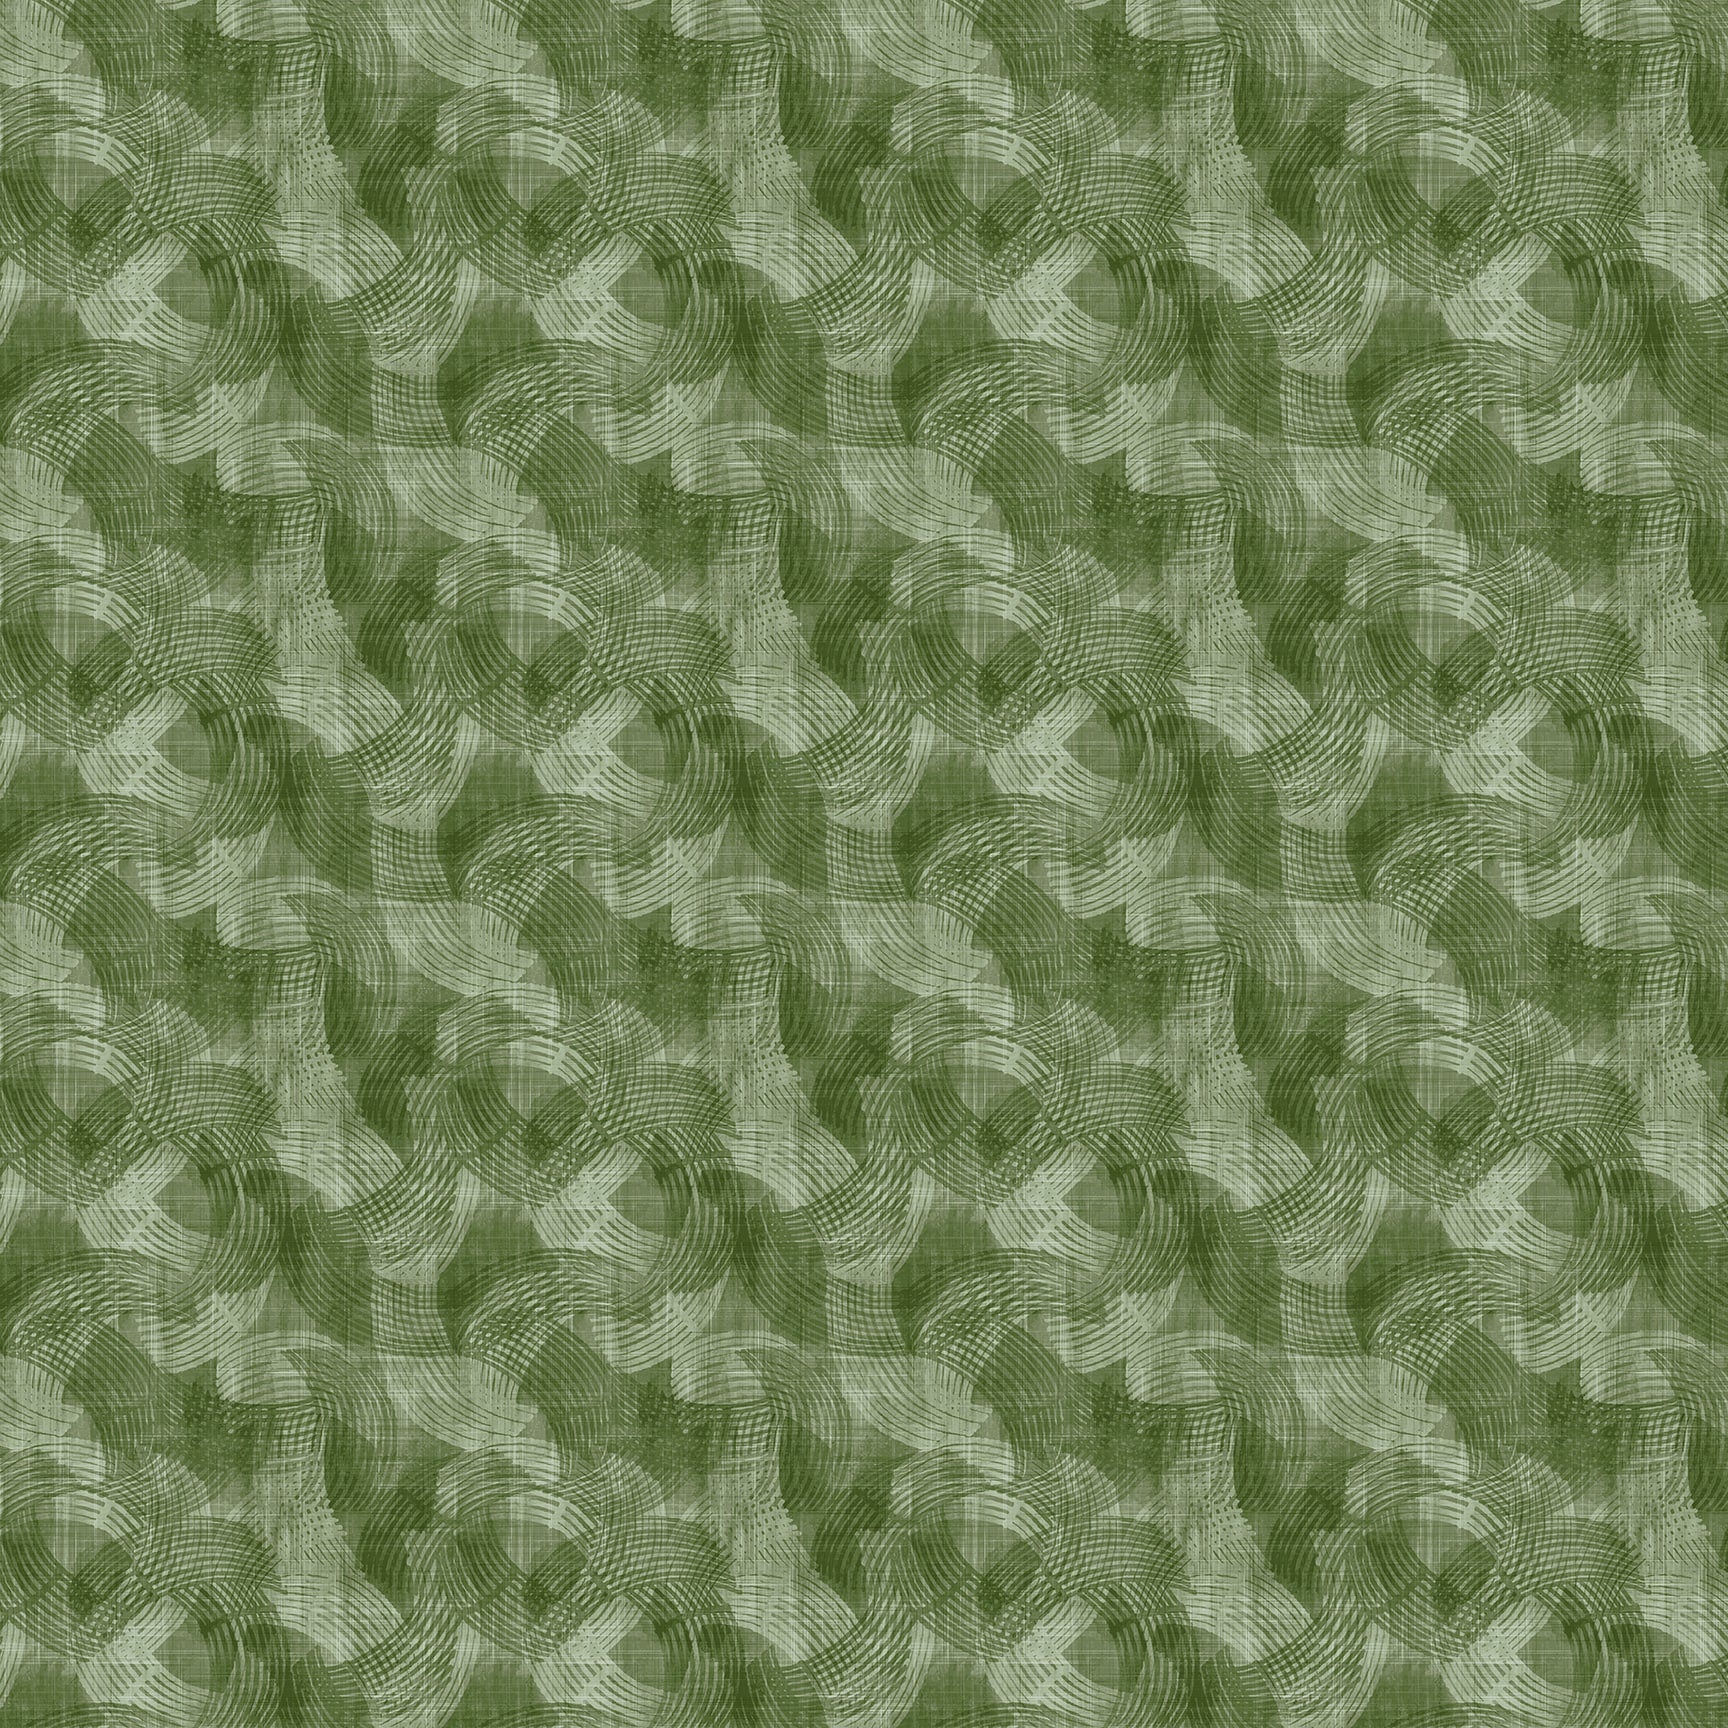 108" Crescent Quilt Backing Fabric - Textured Arcs in Sage Green - 2970-66